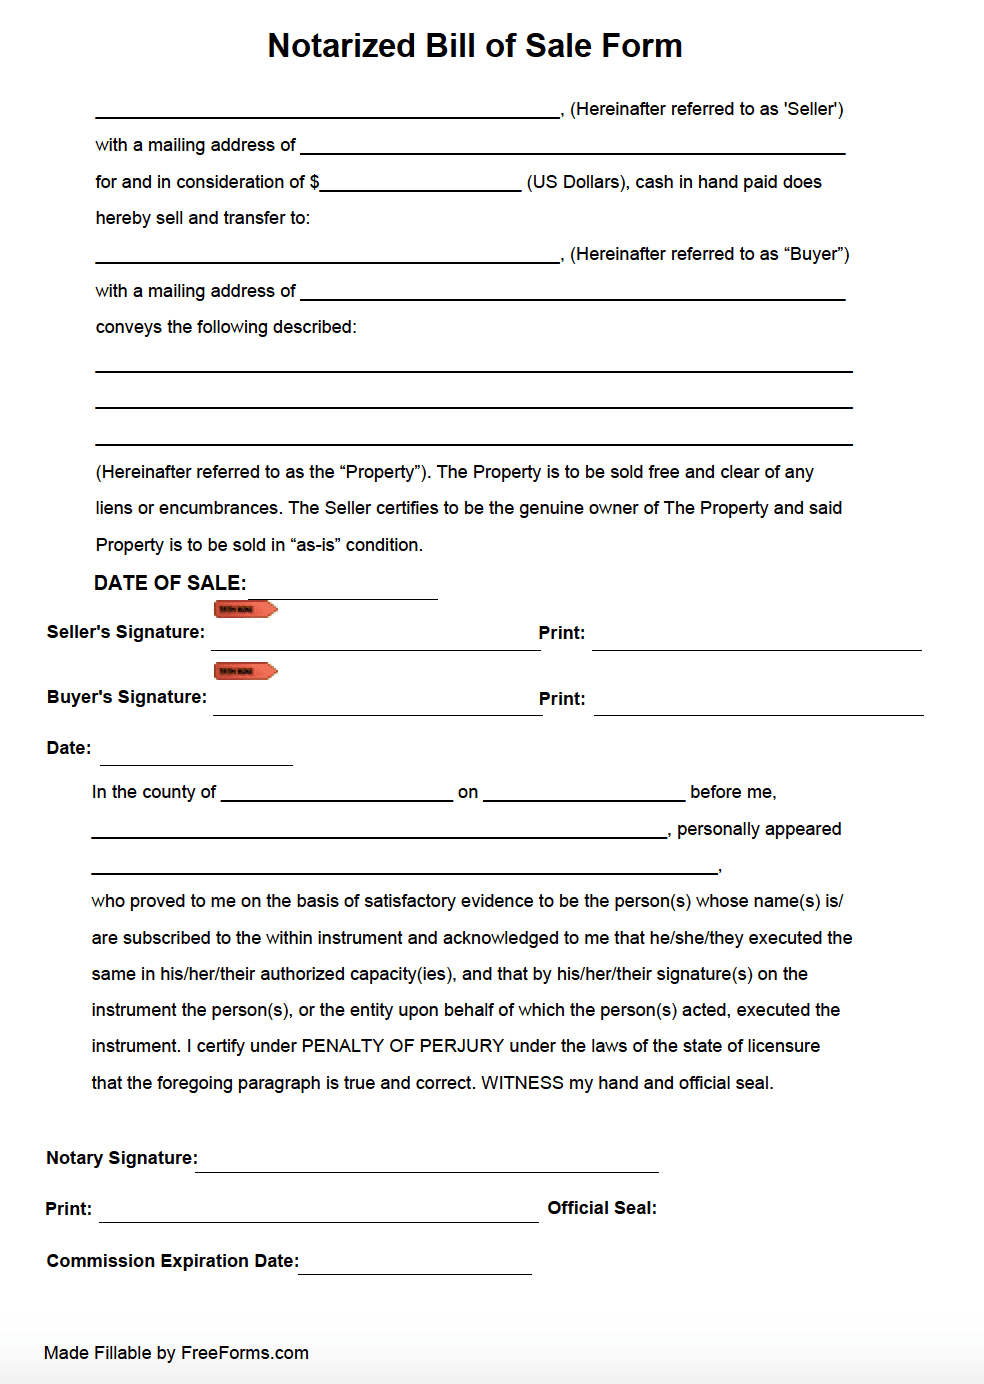 Example Of Notary Letter from freeforms.com